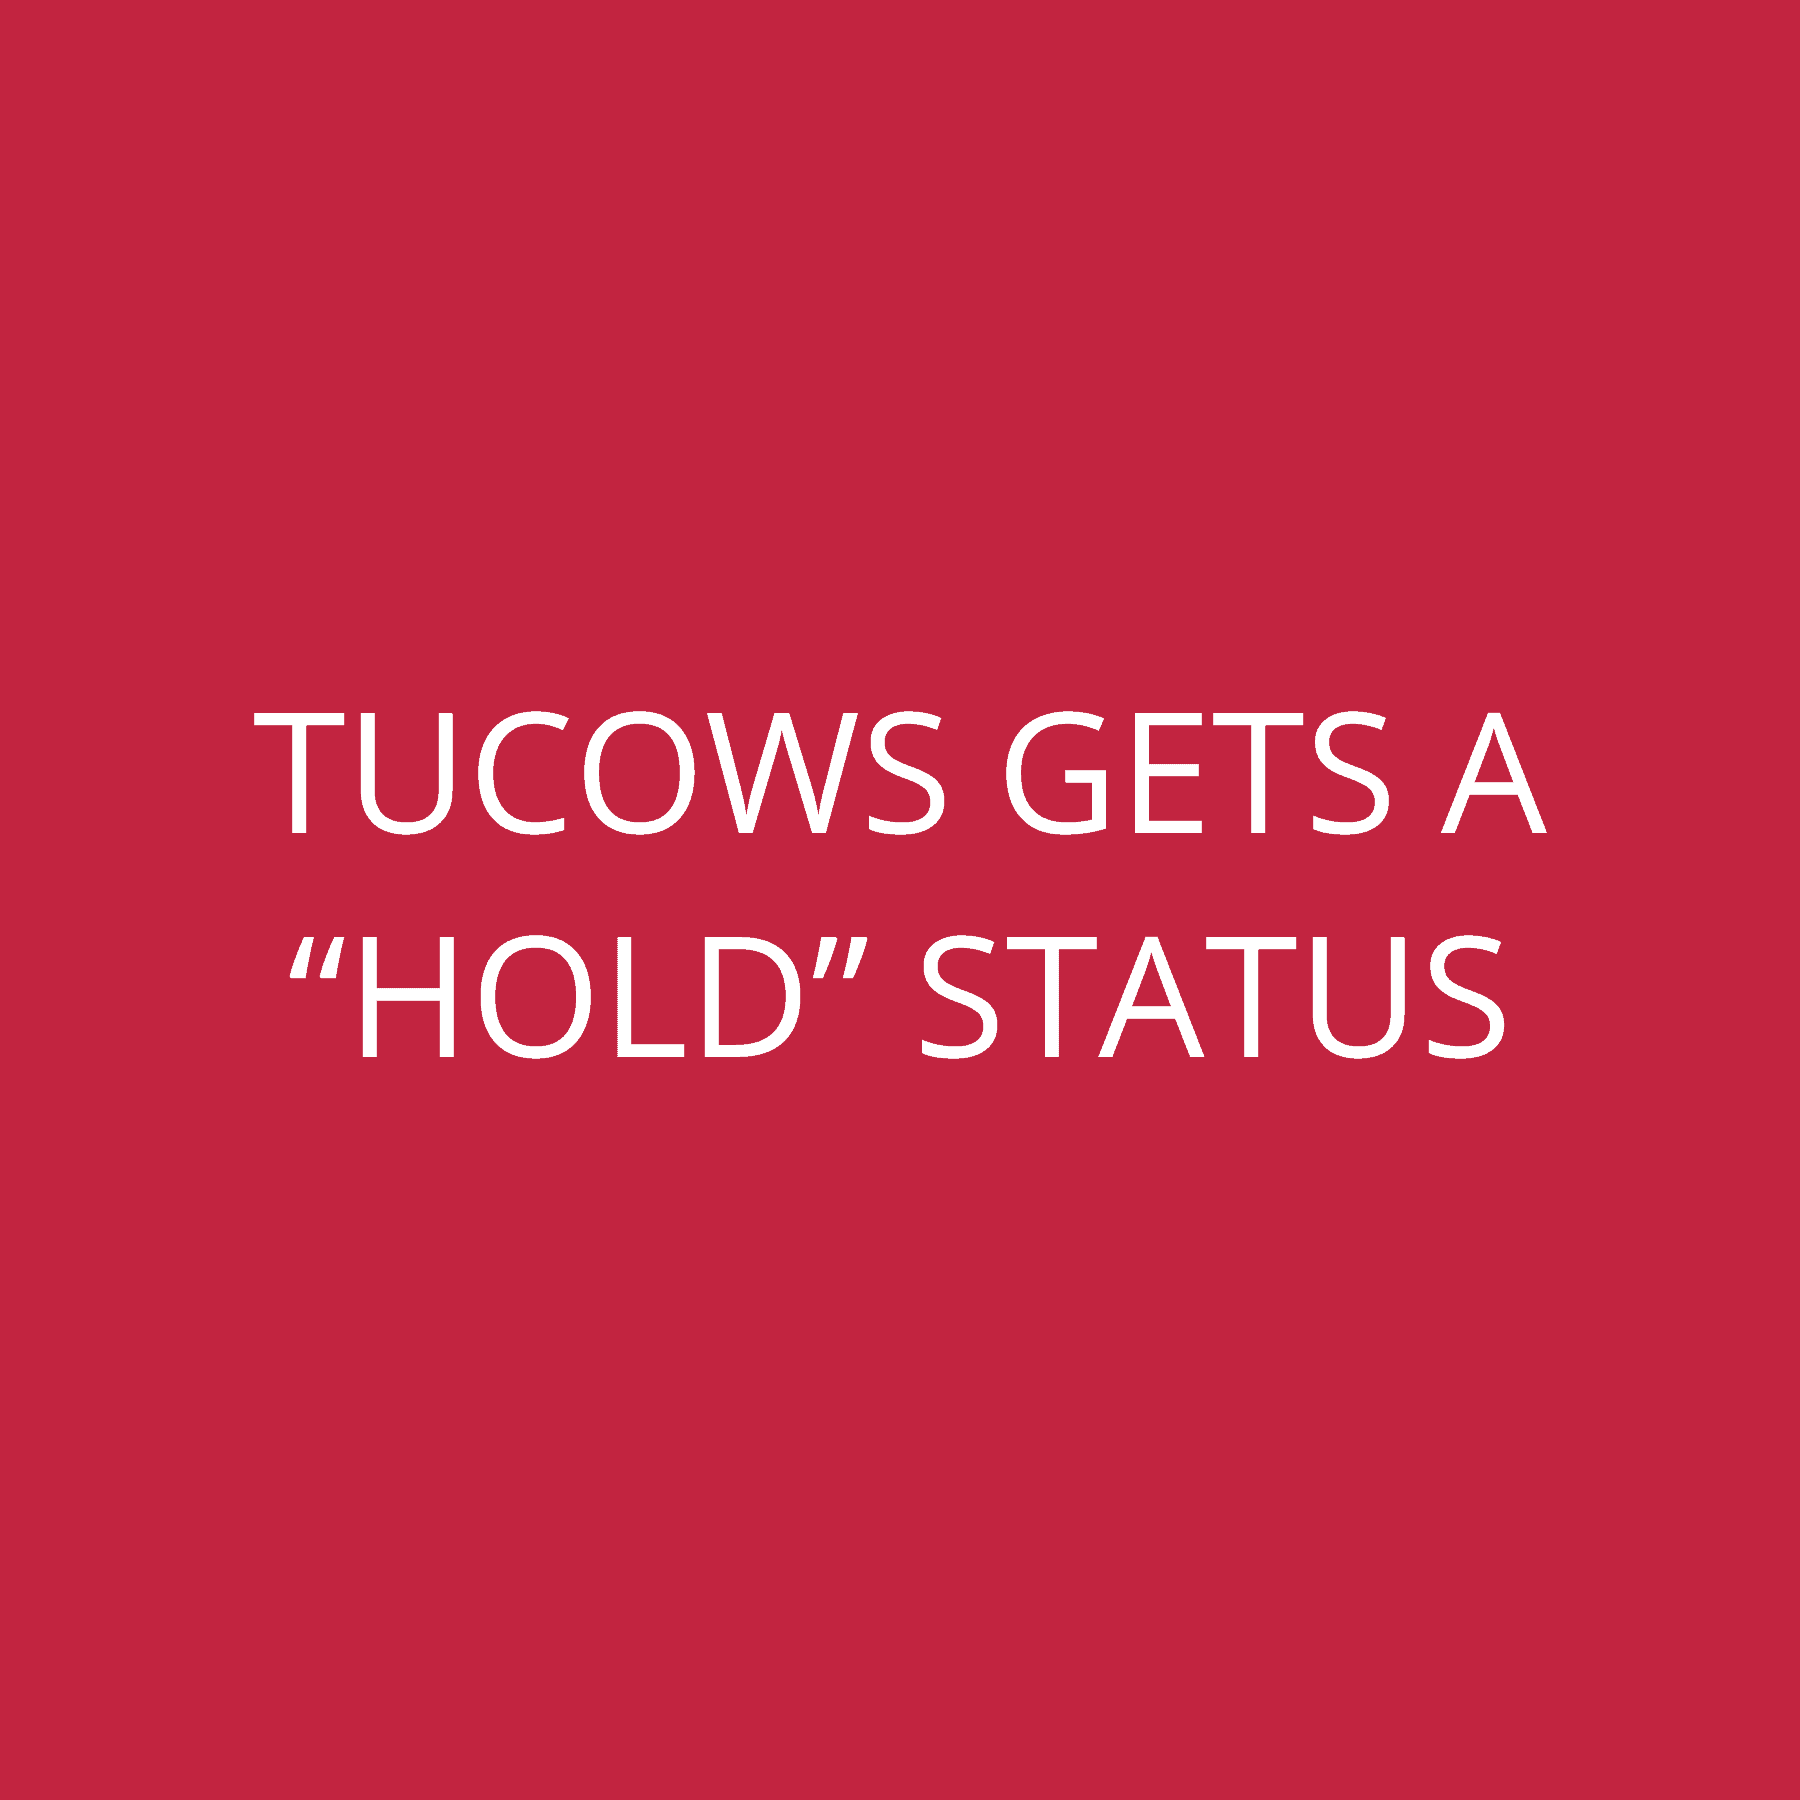 Tucows gets a “Hold” status